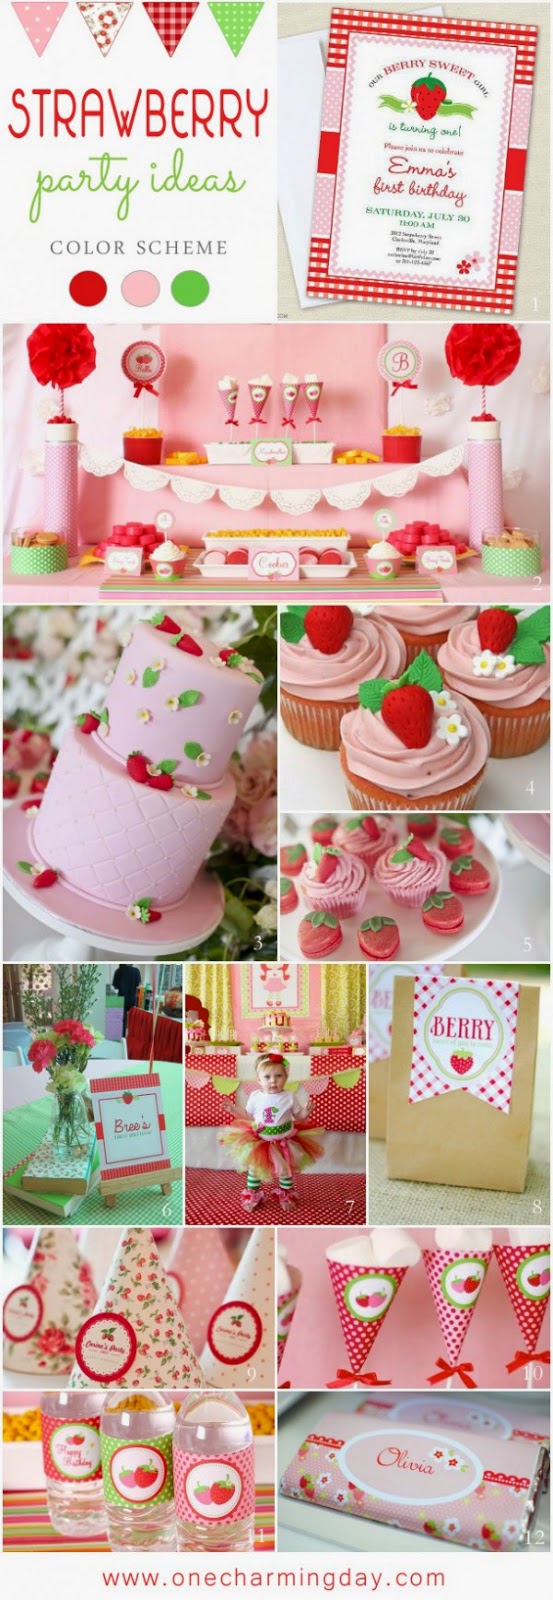 34 Creative Girl First Birthday Party Themes And Ideas My Little Moppet,Kitchenaid Artisan Design Ksm155gb